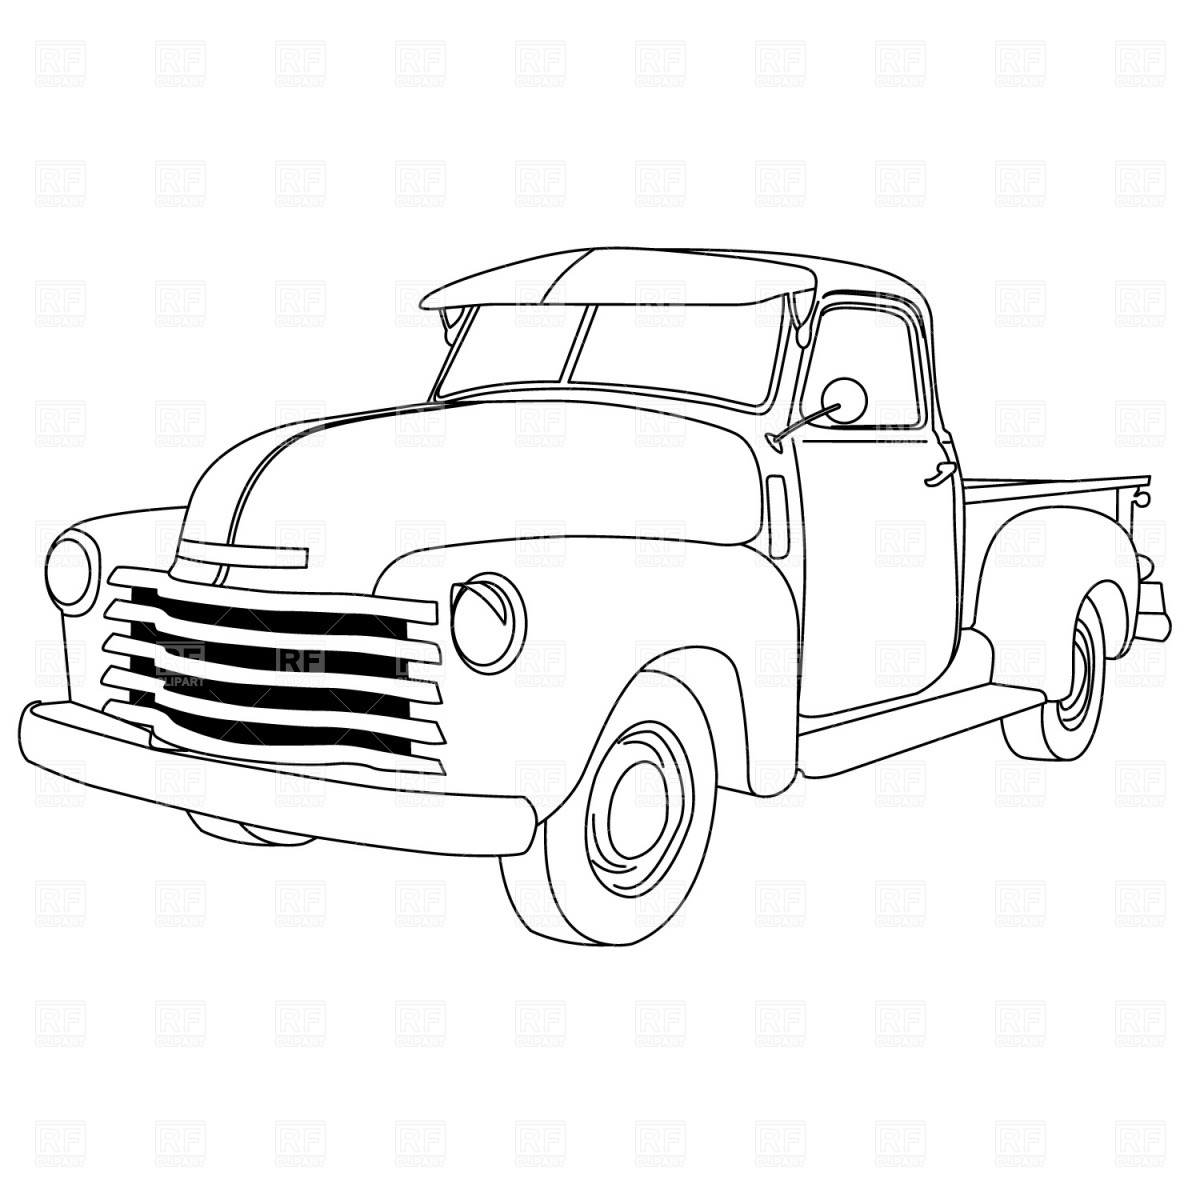 Old Chevy Truck Drawings